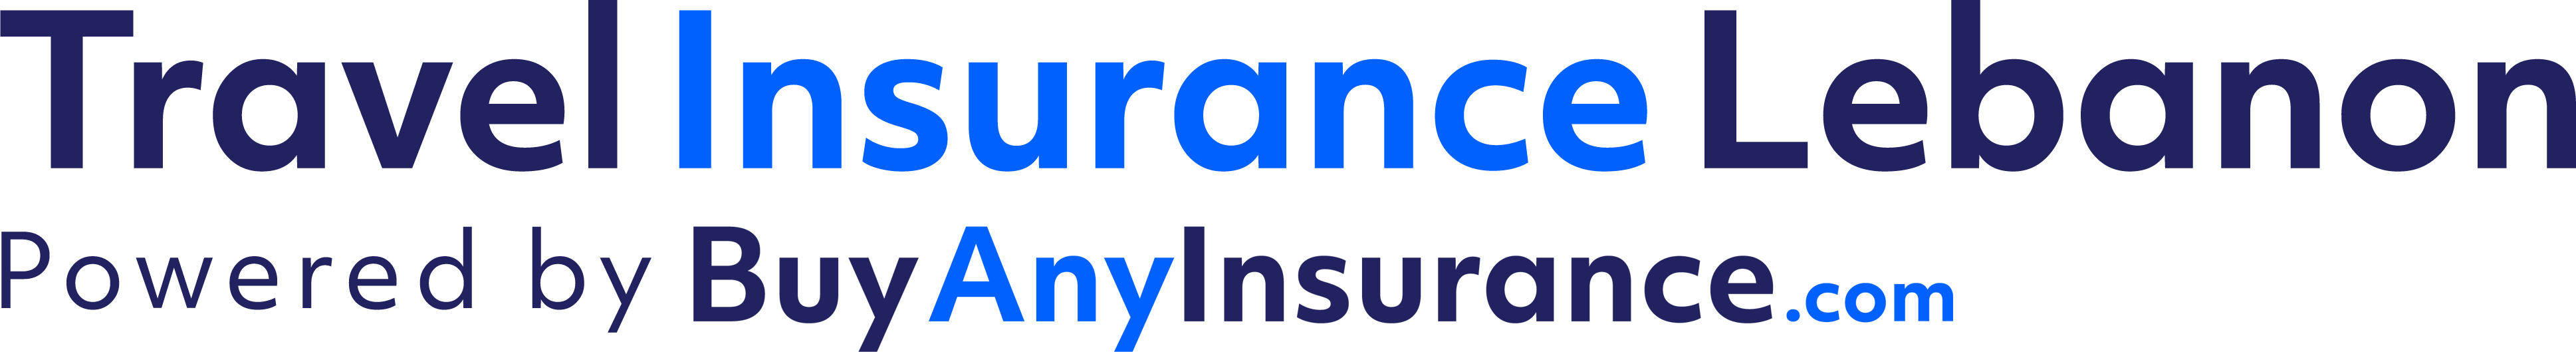 Travel Insurance in Lebanon | Compare & Buy Online Today